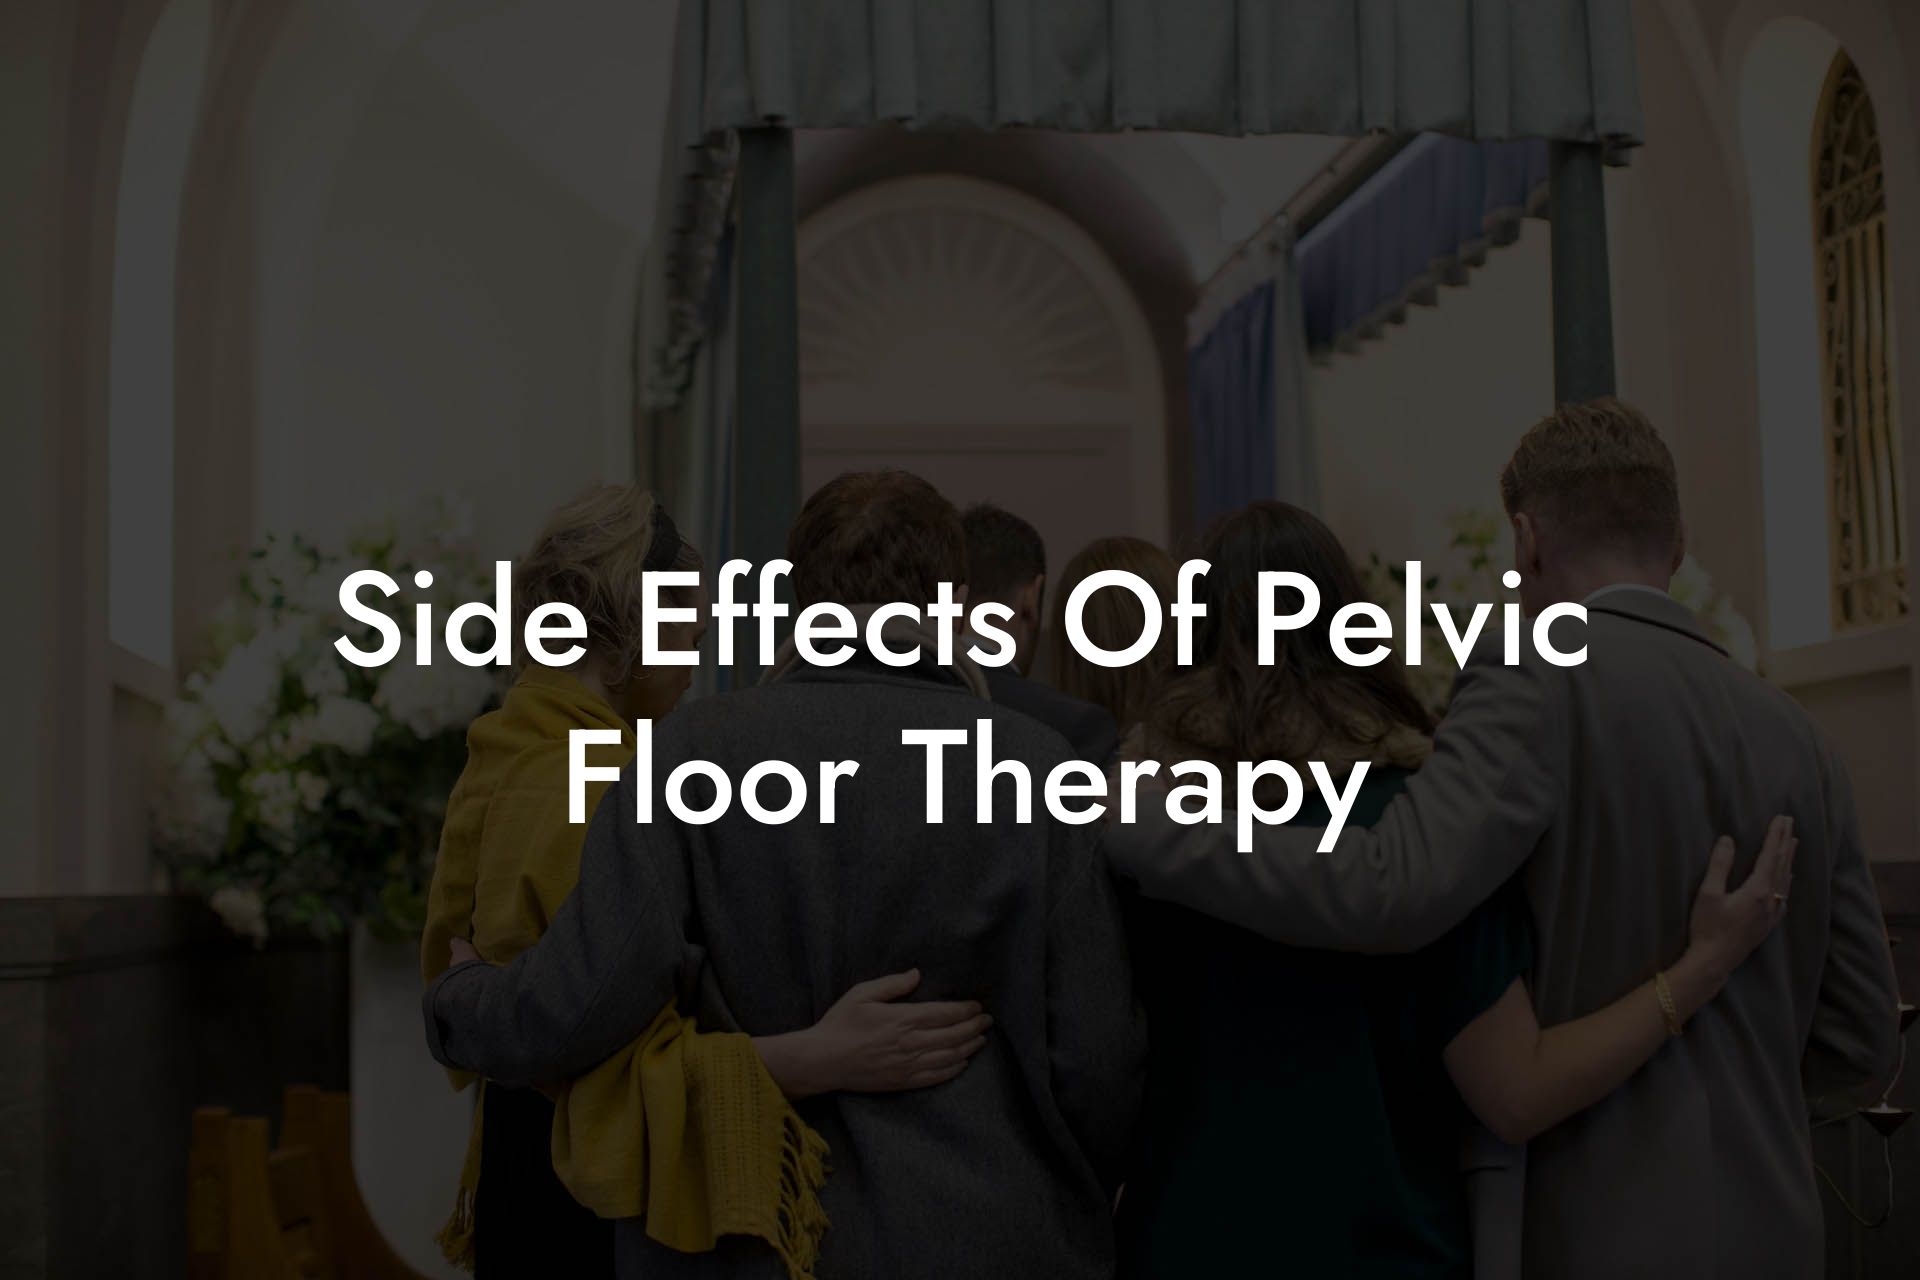 Side Effects Of Pelvic Floor Therapy